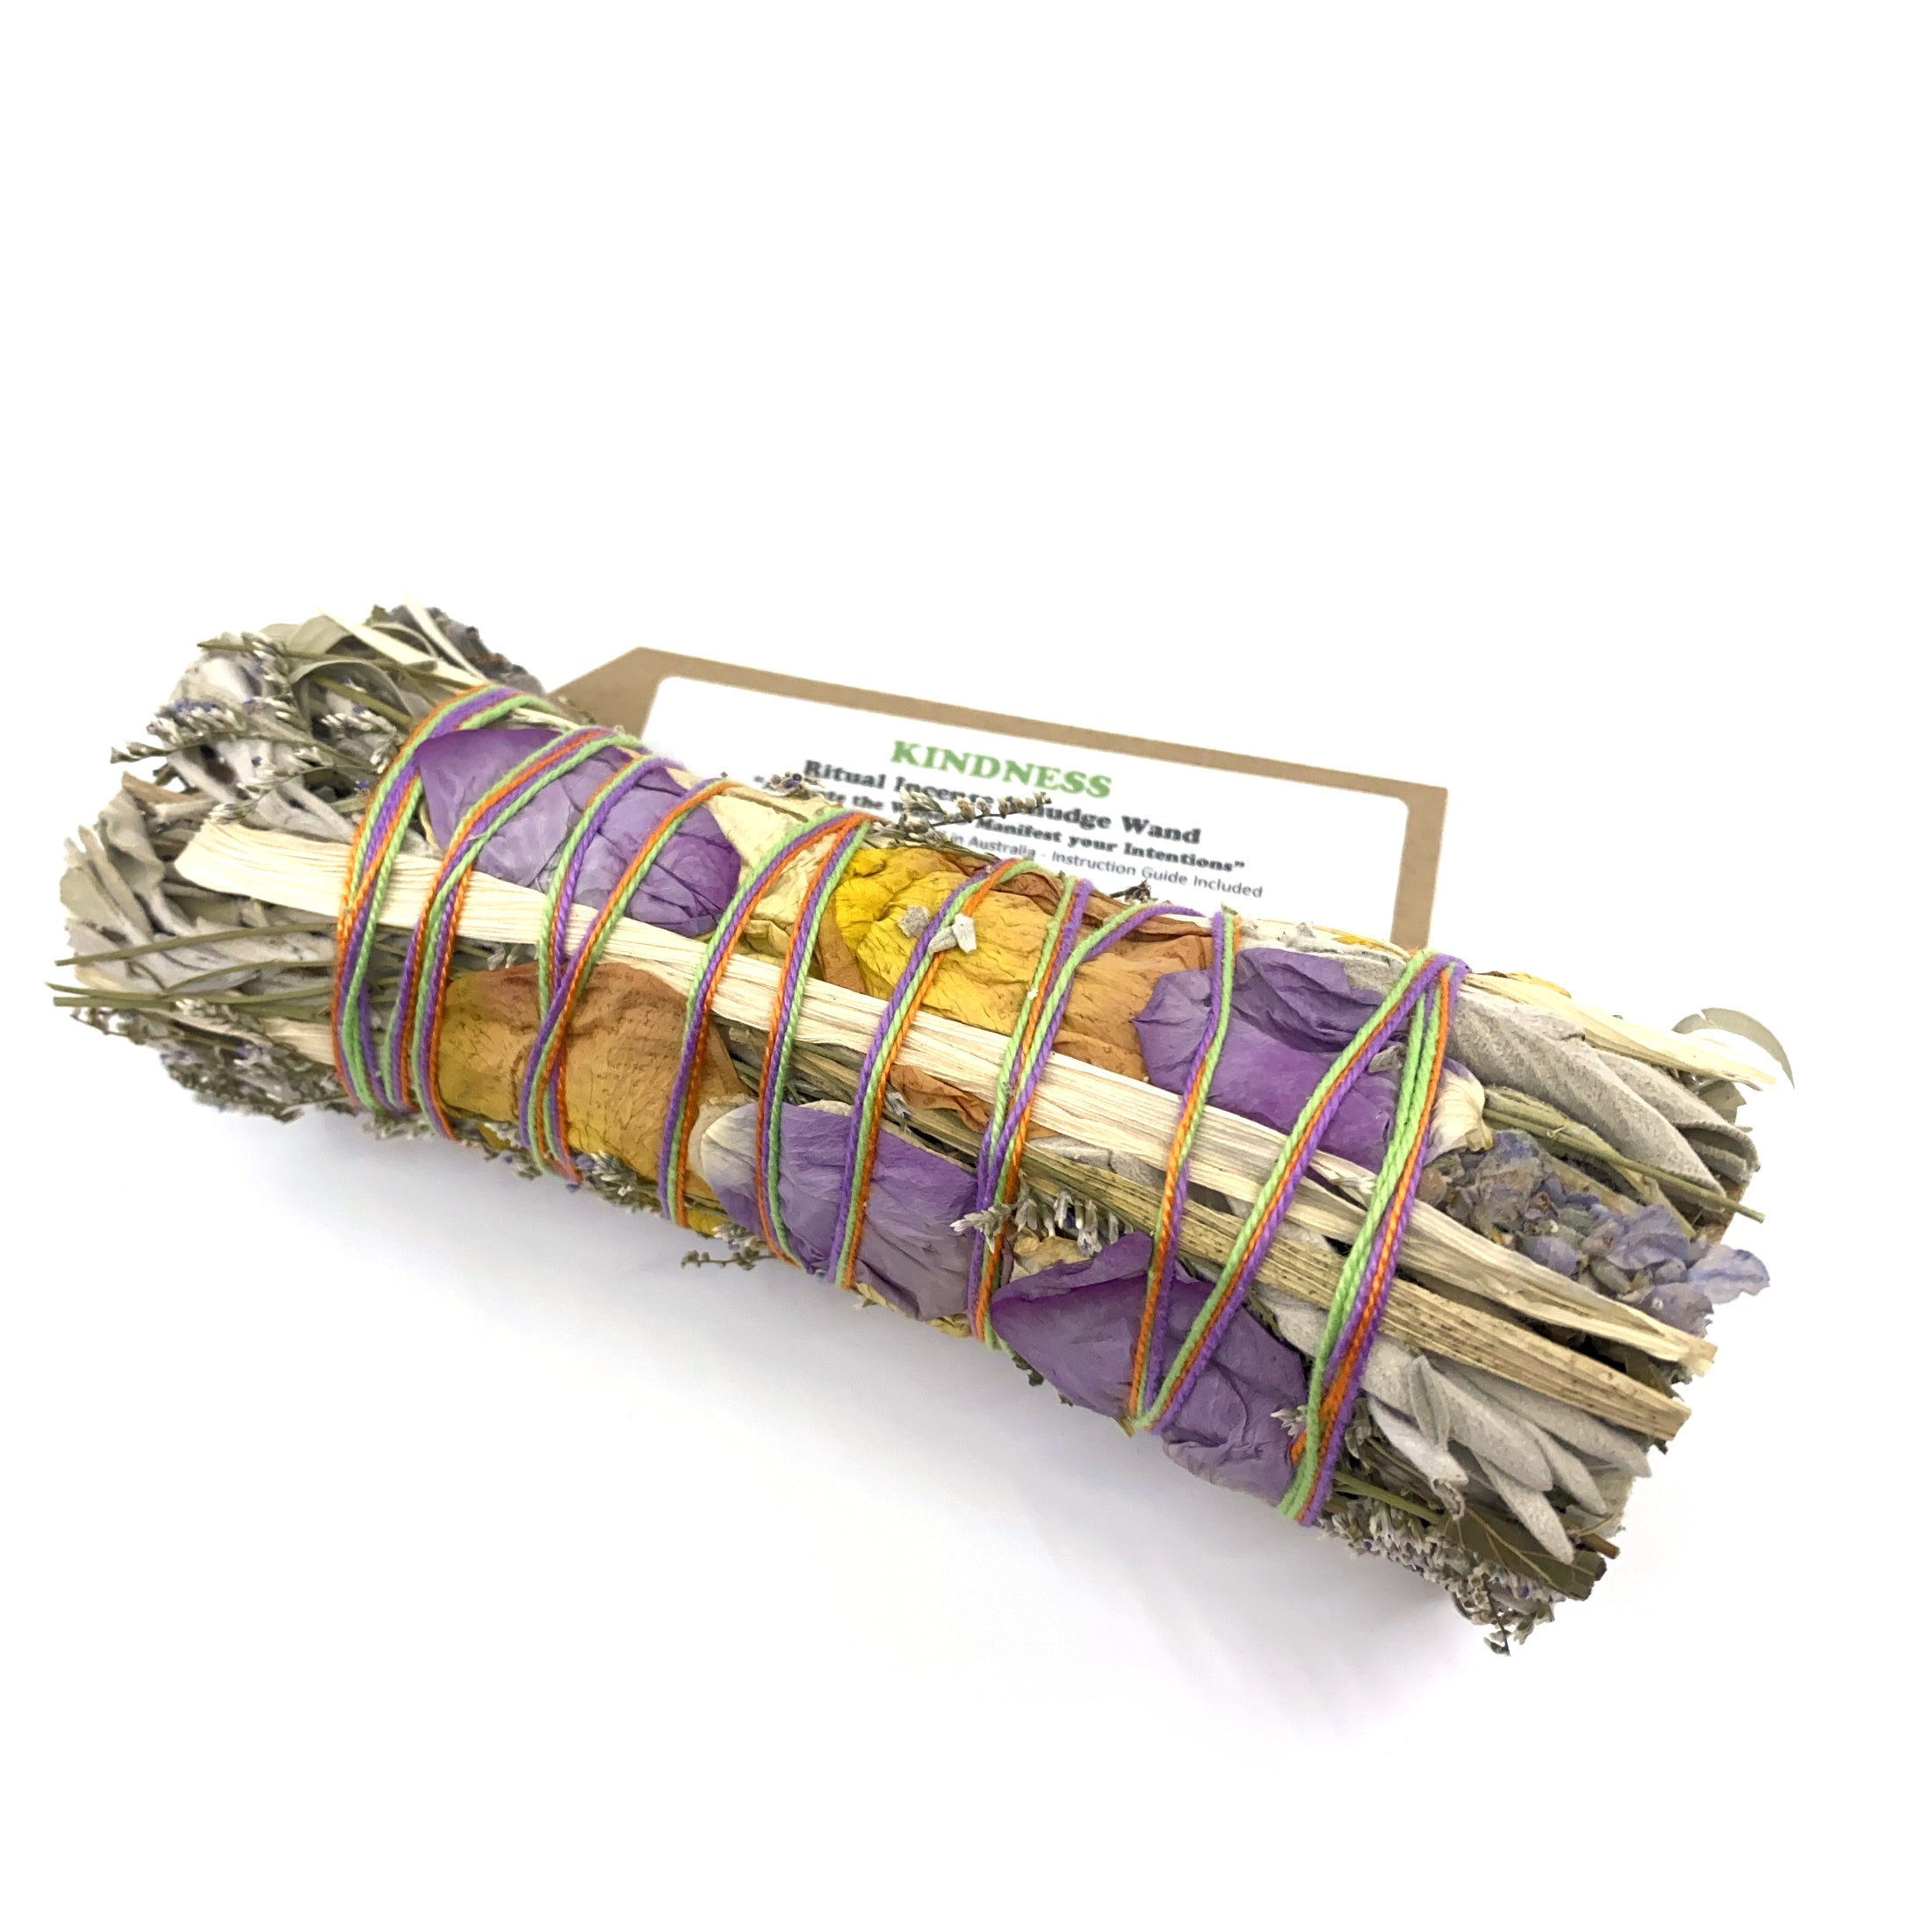 Kindness - With Good Intentions Smudge Stick